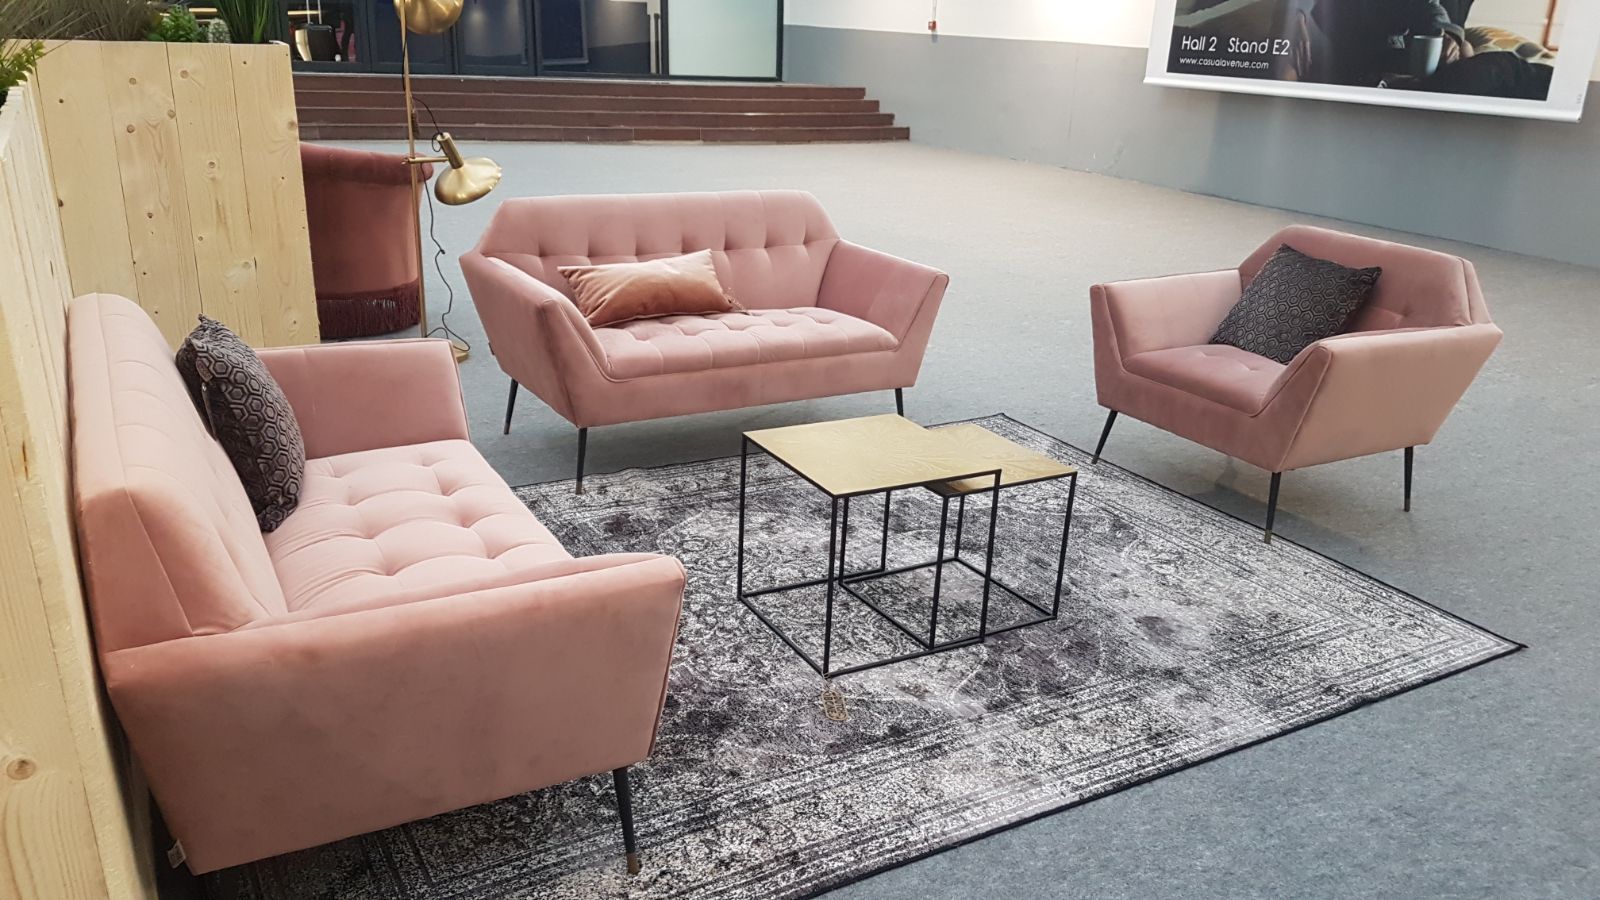 image of pastel pink hired furniture laid out in a circle